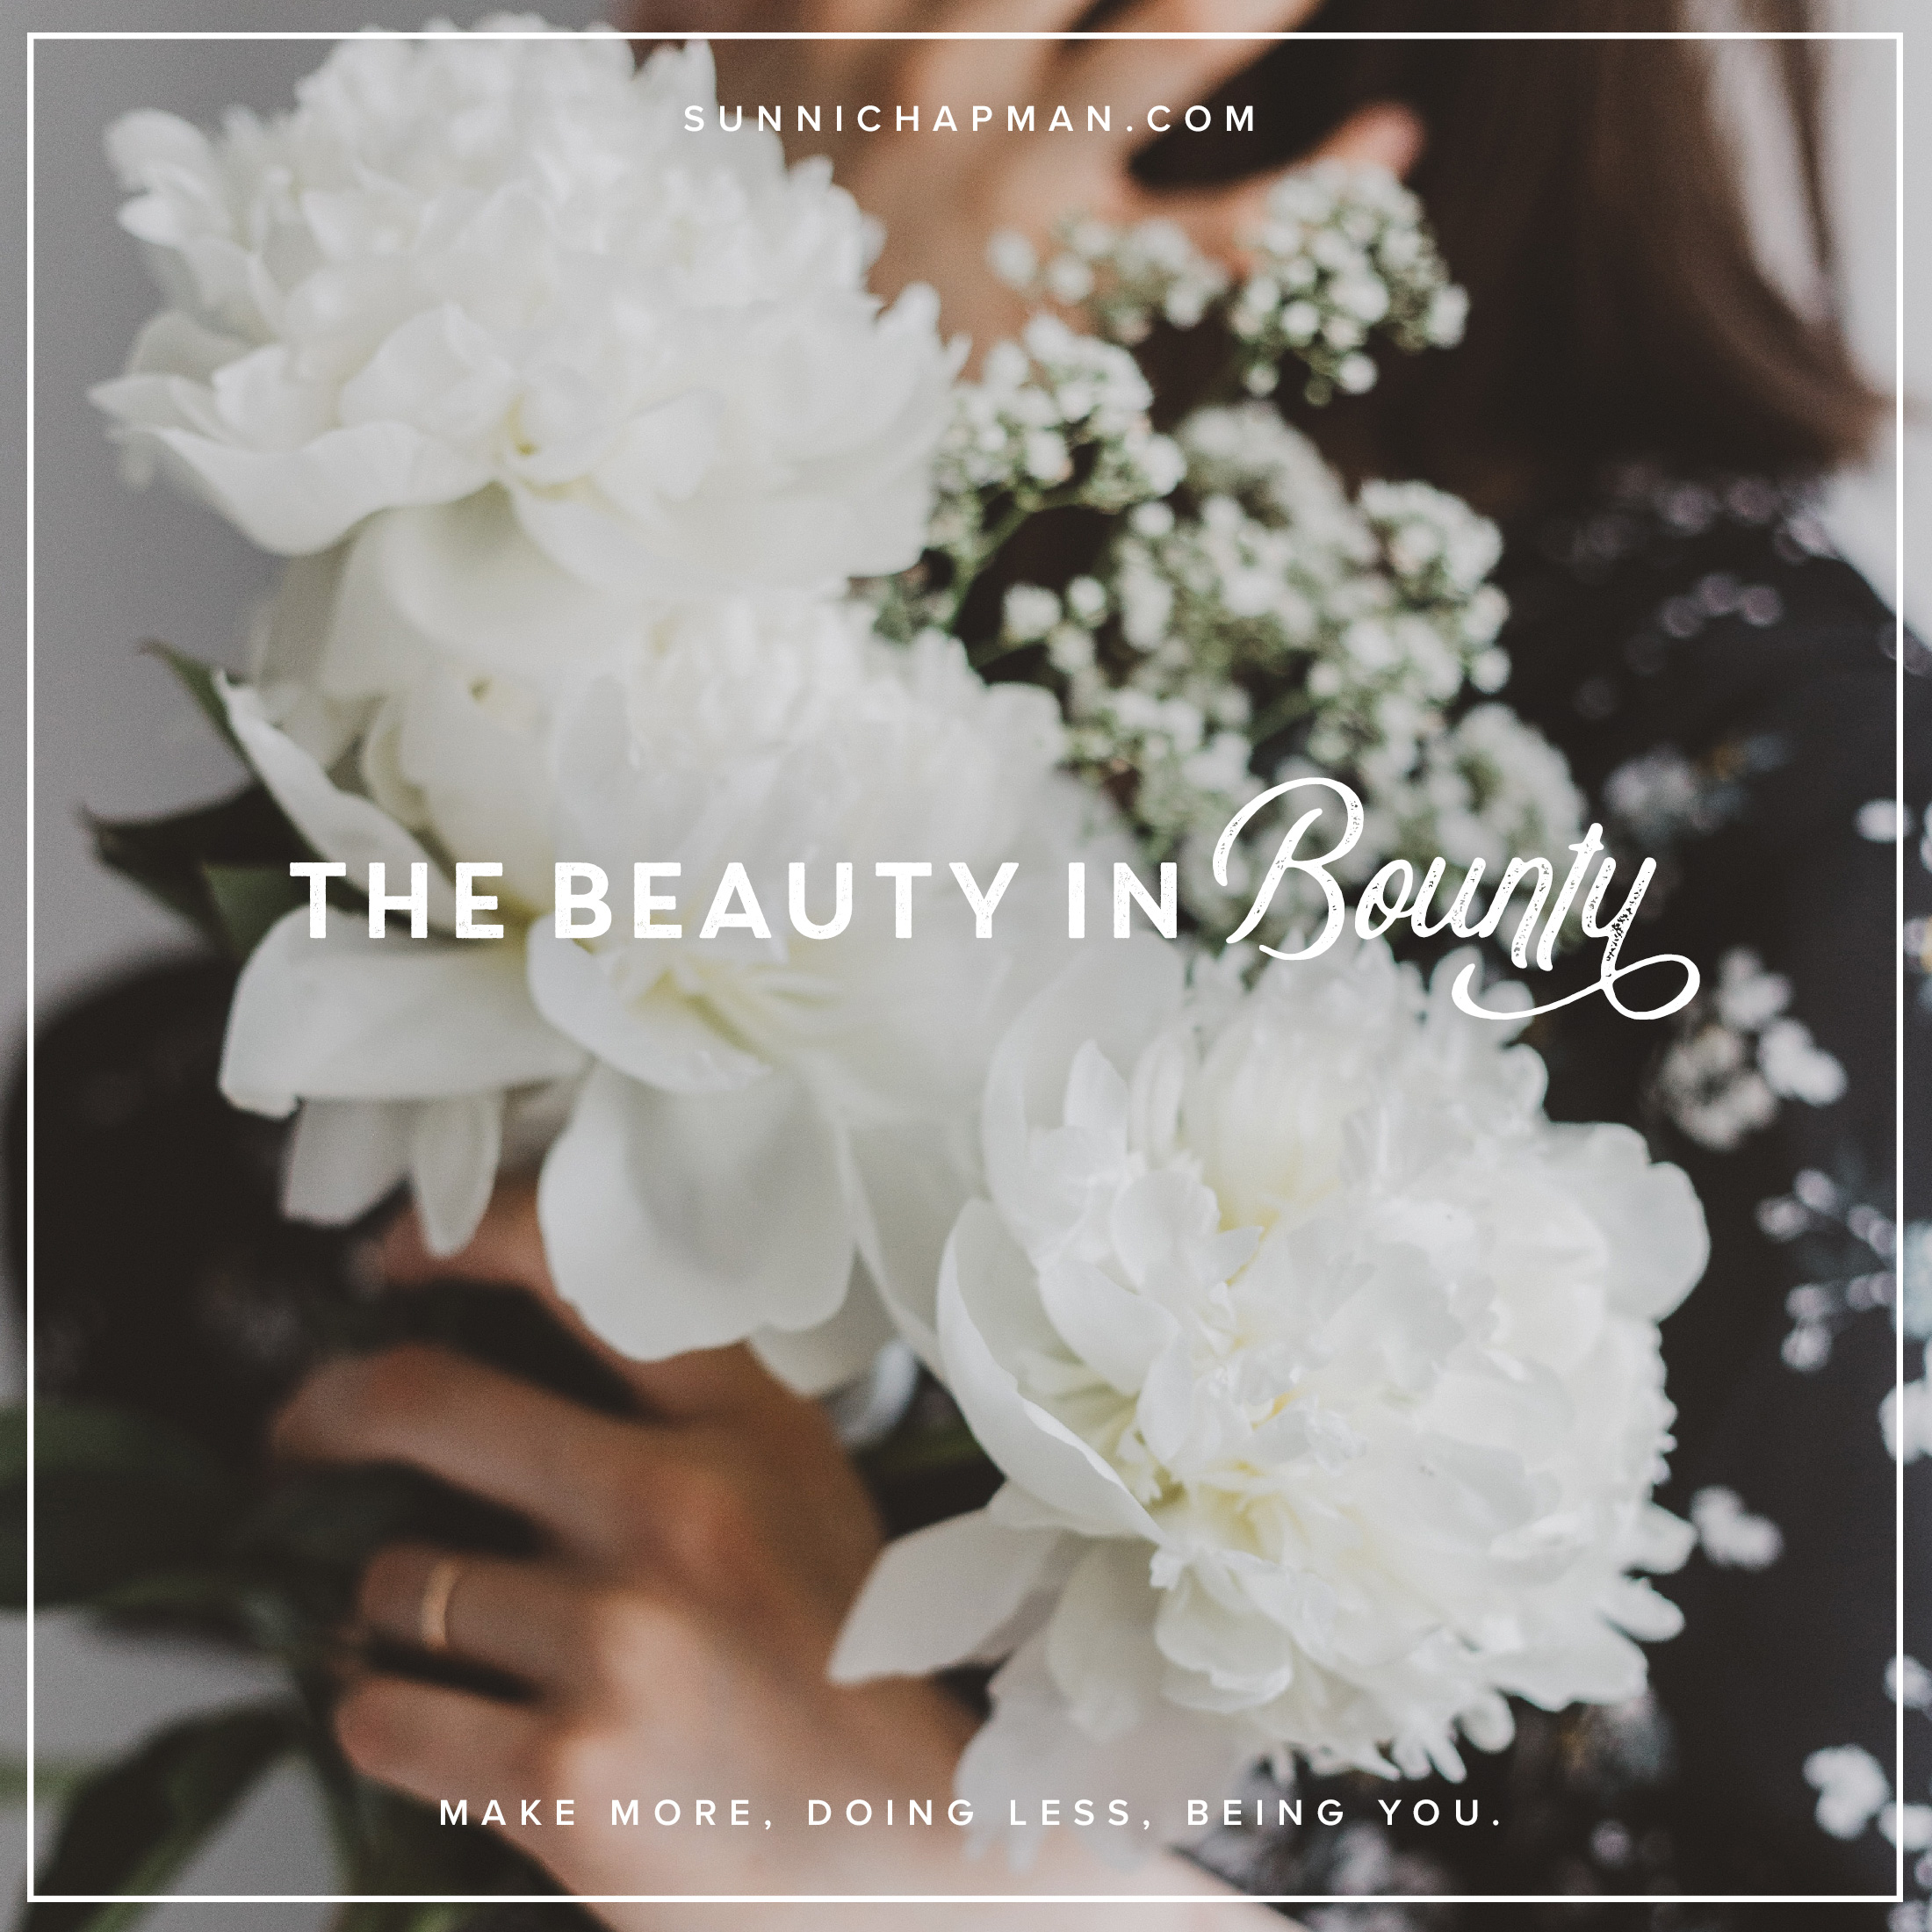 Woman holding bouquet of white, beautiful flowers, and text: The Beauty in Bounty